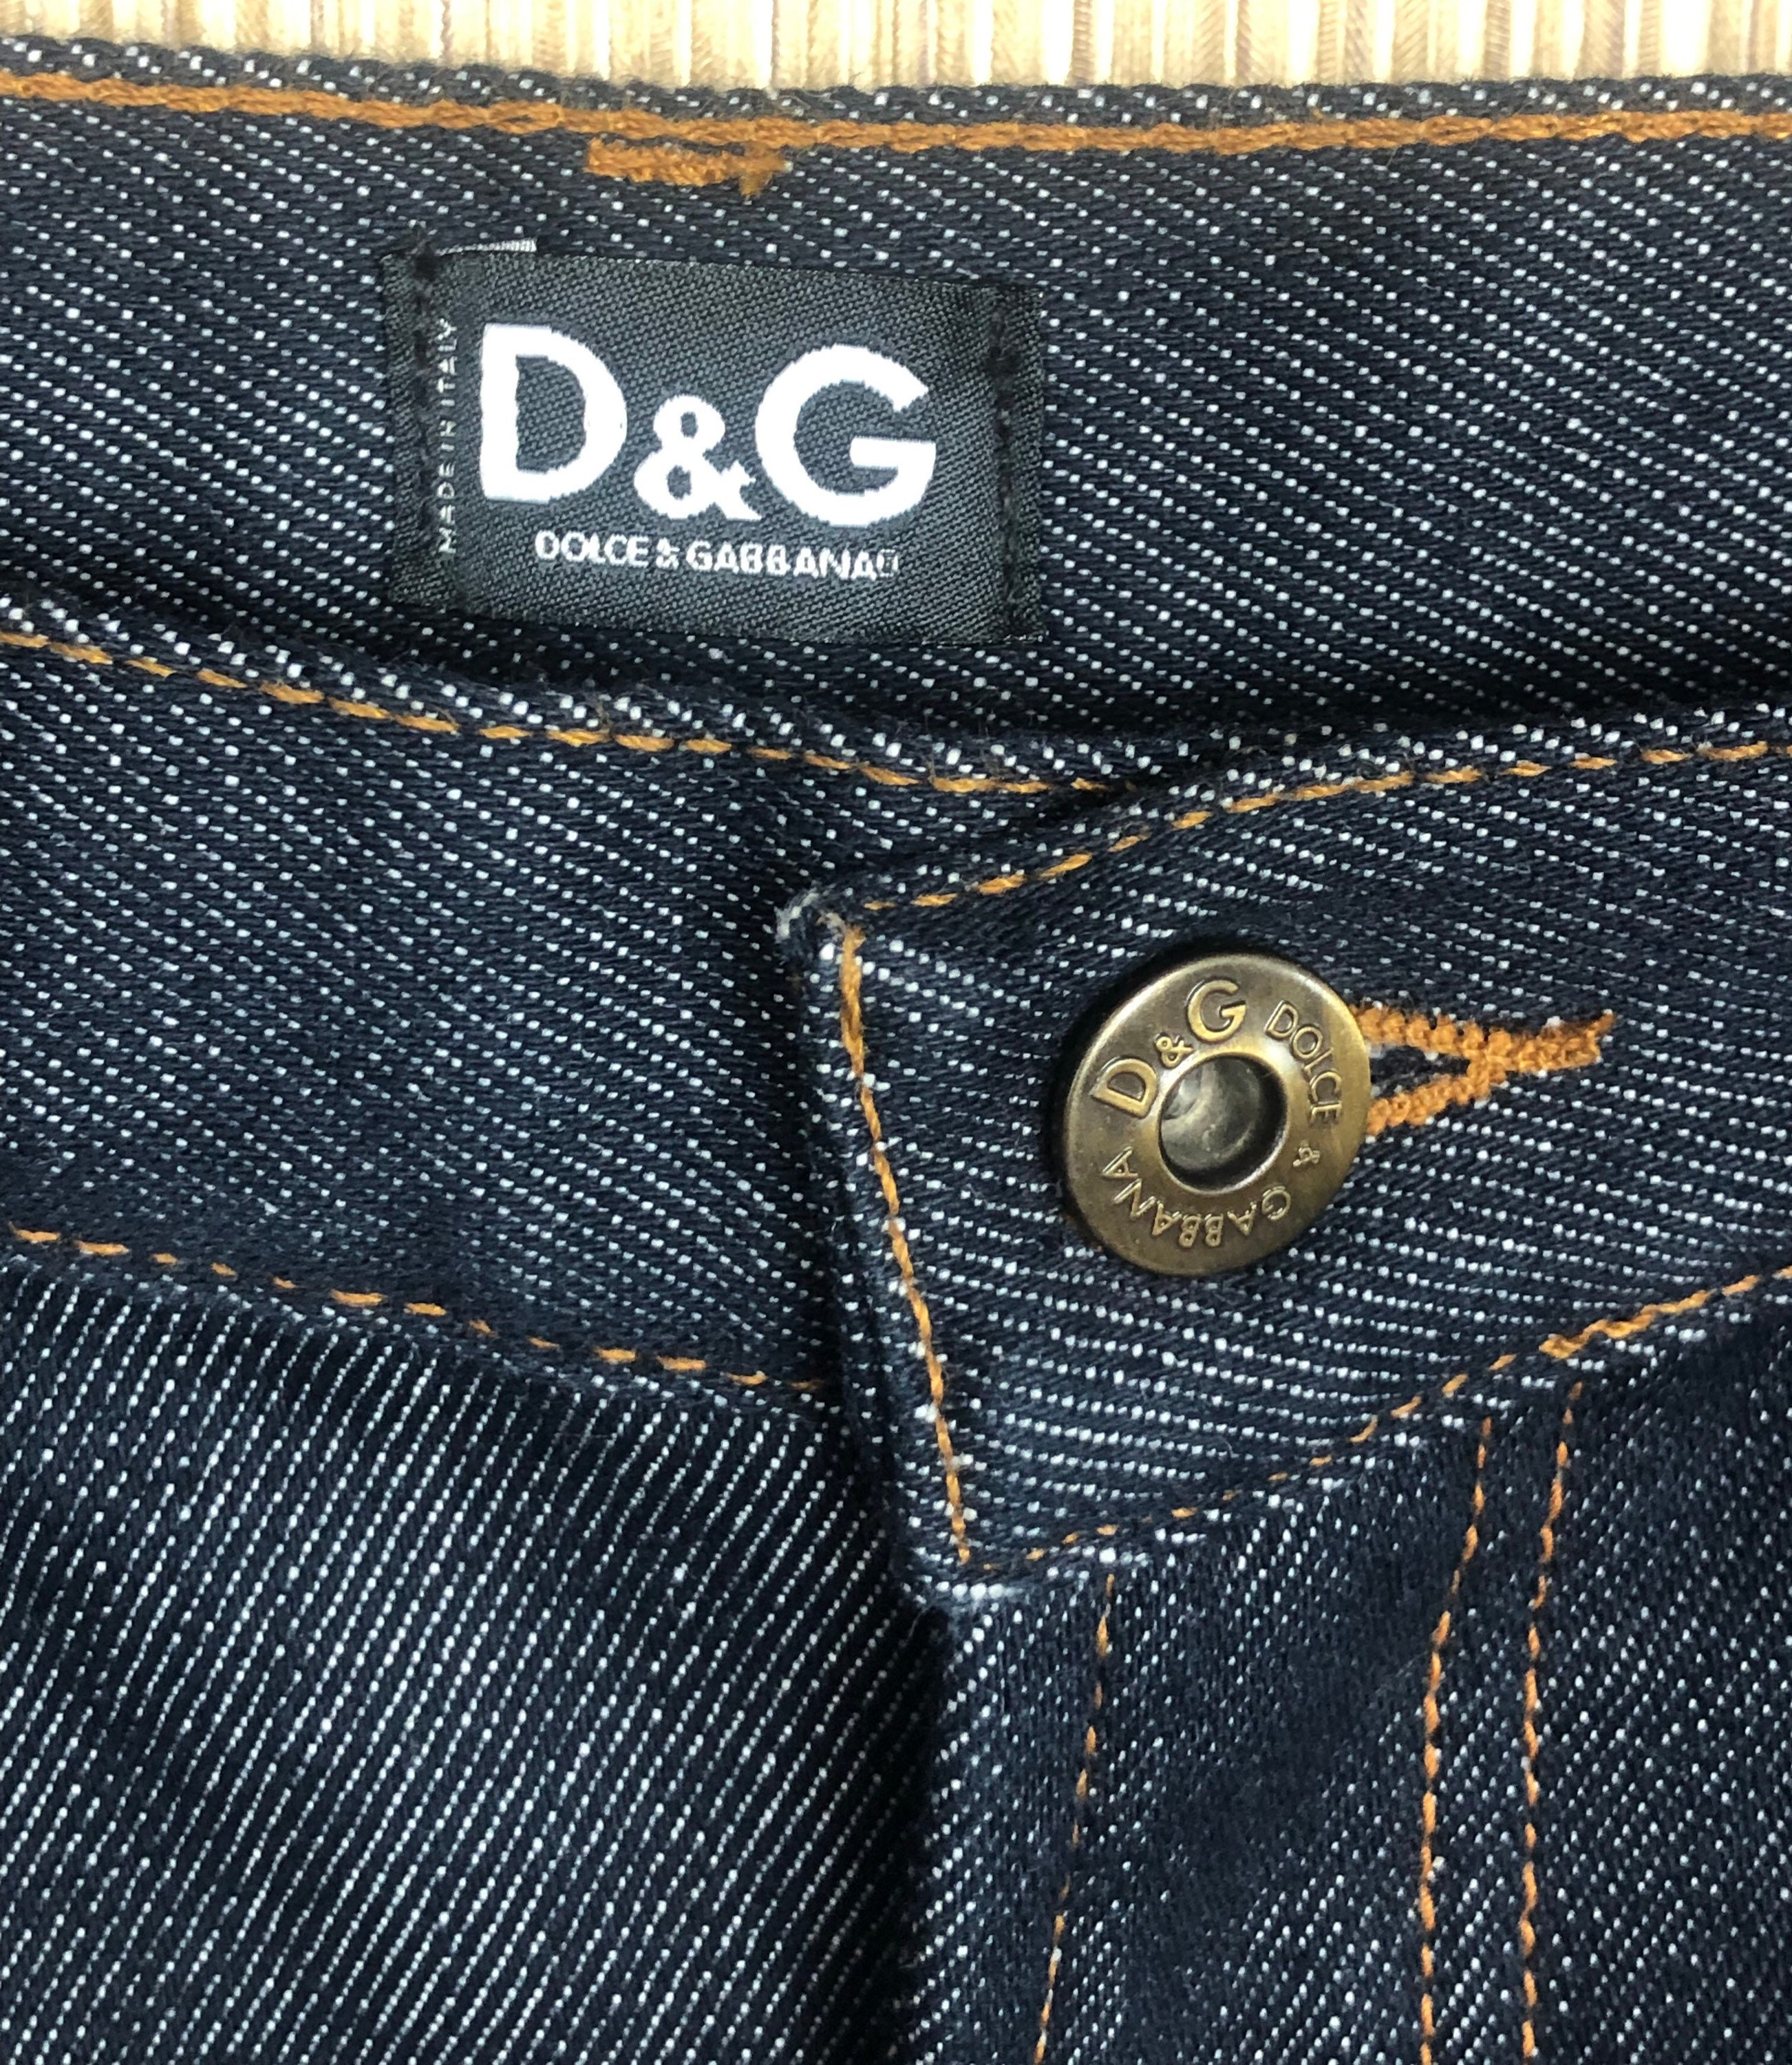 trolley bus Bedrag Grusom Dolce & Gabbana Jeans Vintage Leather Parts Good Condition - Etsy